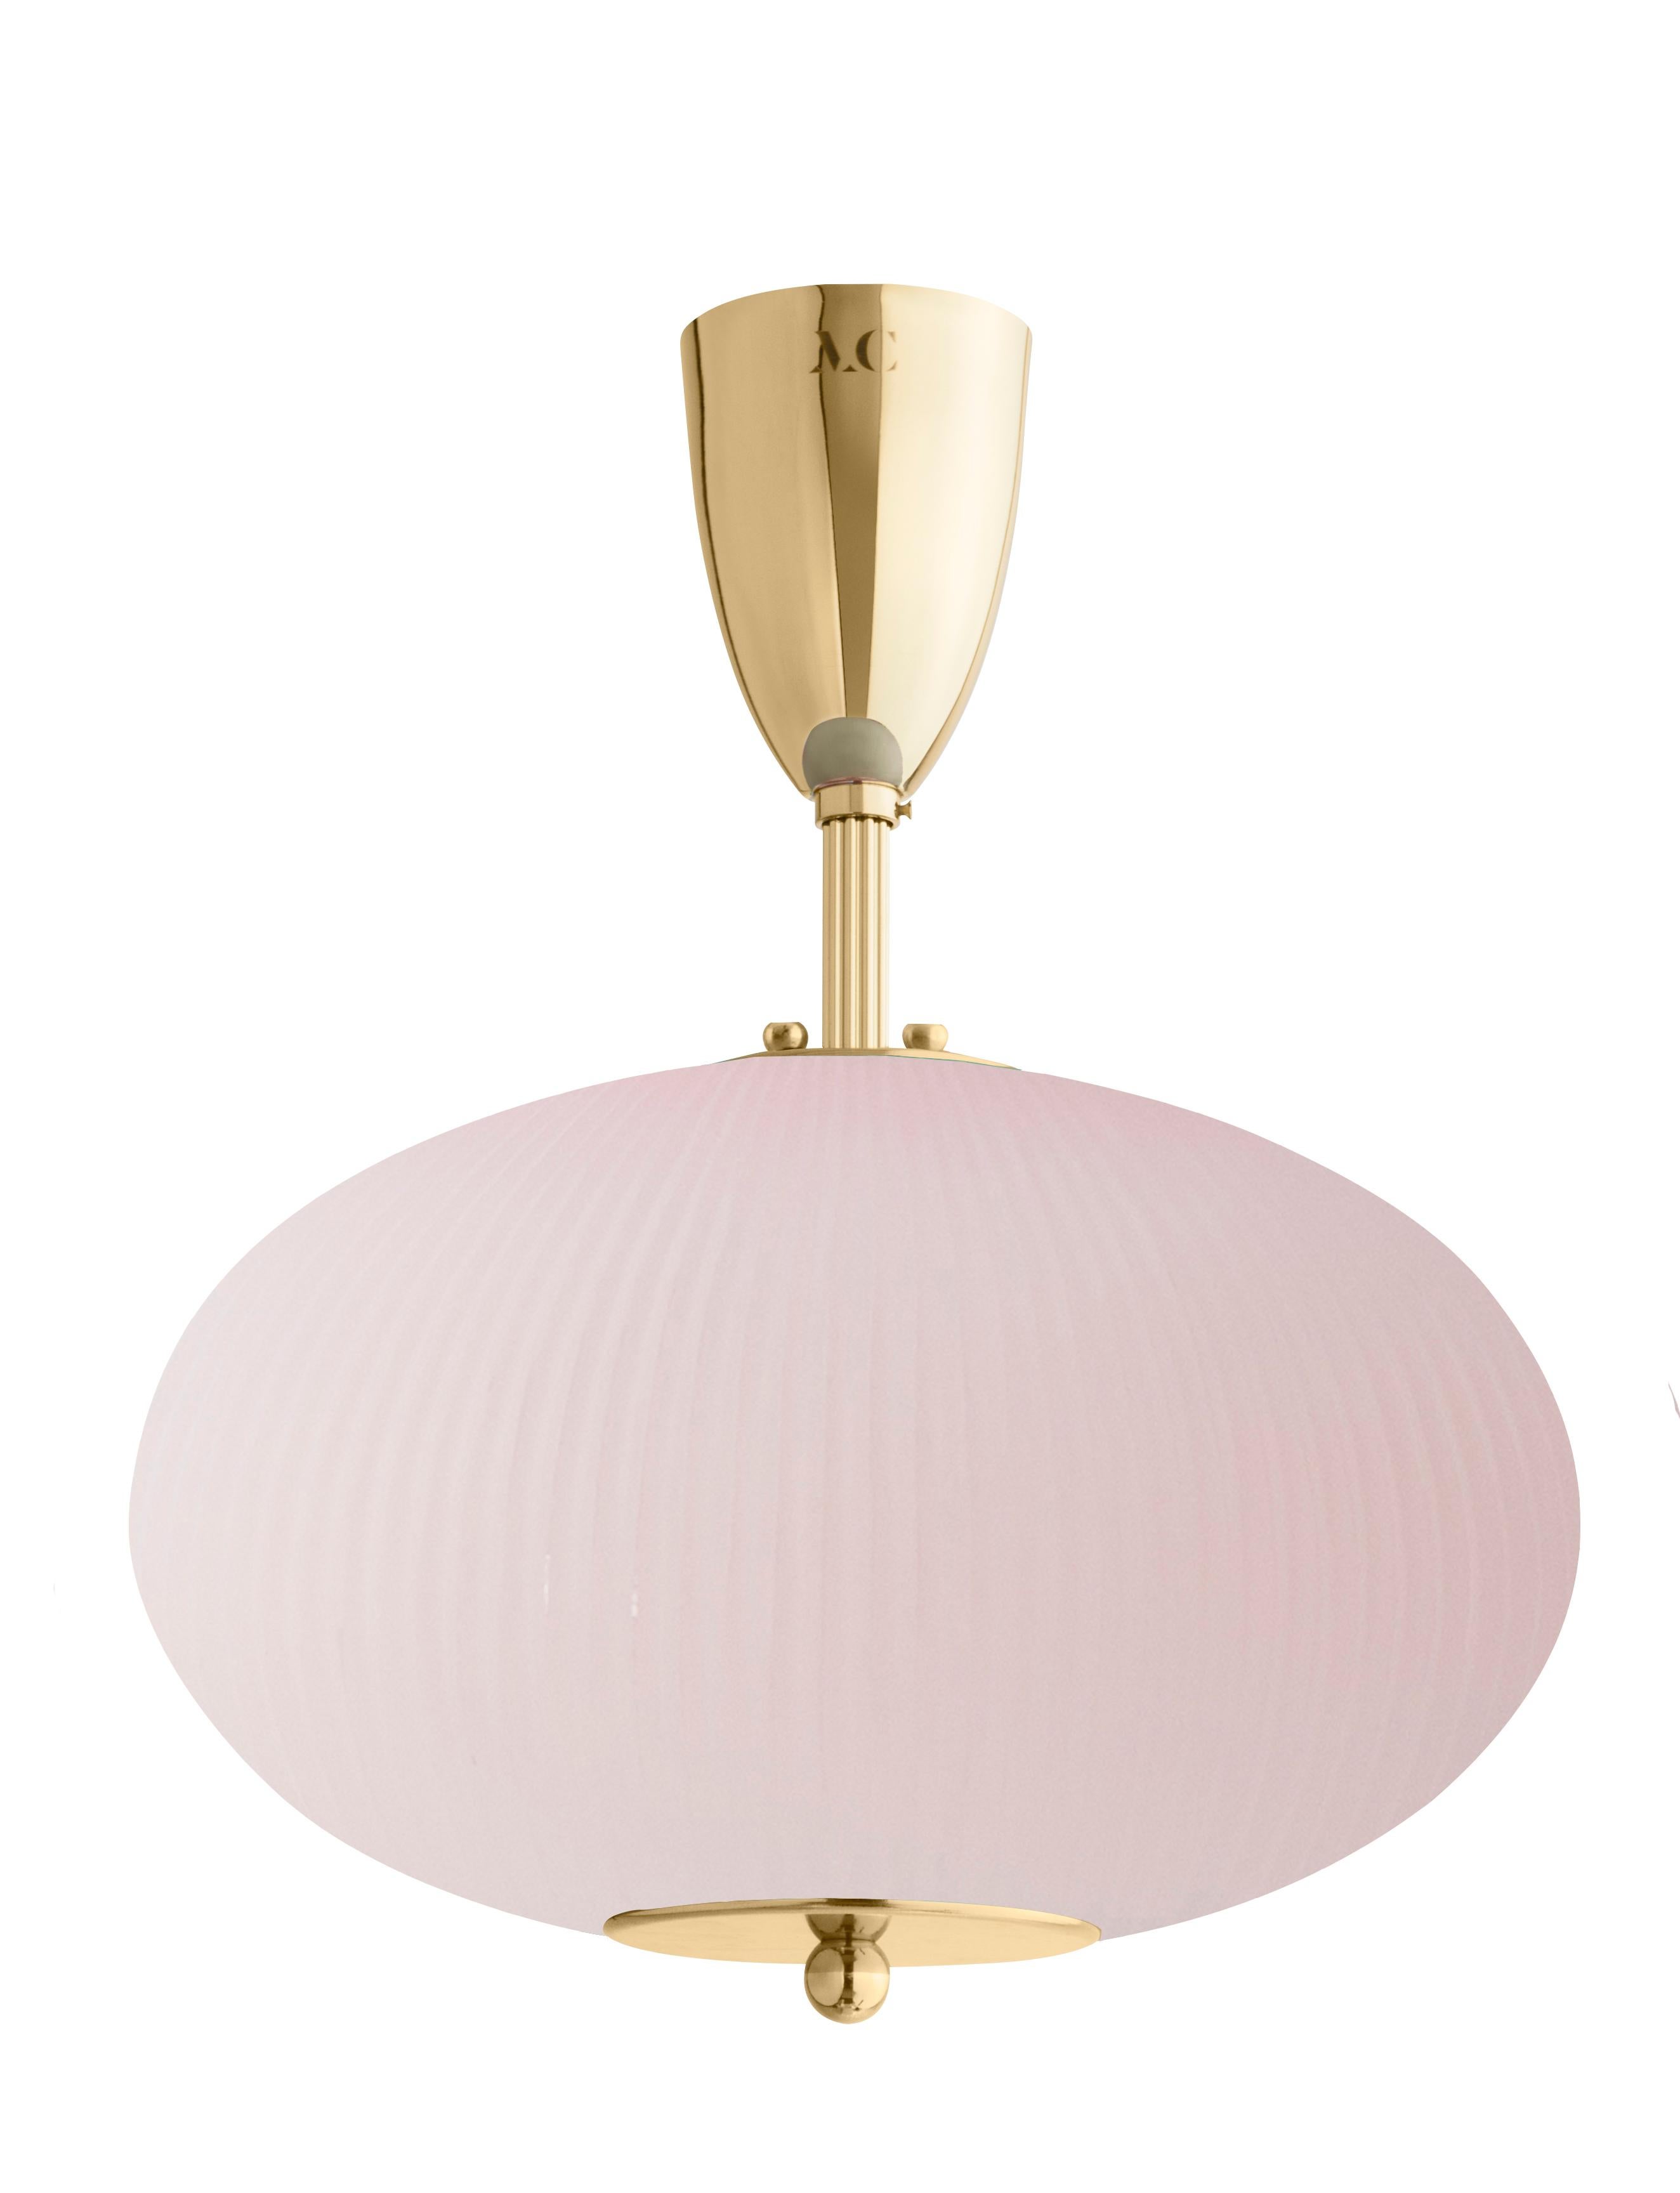 Ceiling Lamp China 07 by Magic Circus Editions
Dimensions: H 40 x W 32 x D 32 cm
Materials: Brass, mouth blown glass sculpted with a diamond saw
Colour: soft rose

Available finishes: Brass, nickel
Available colours: enamel soft white, soft